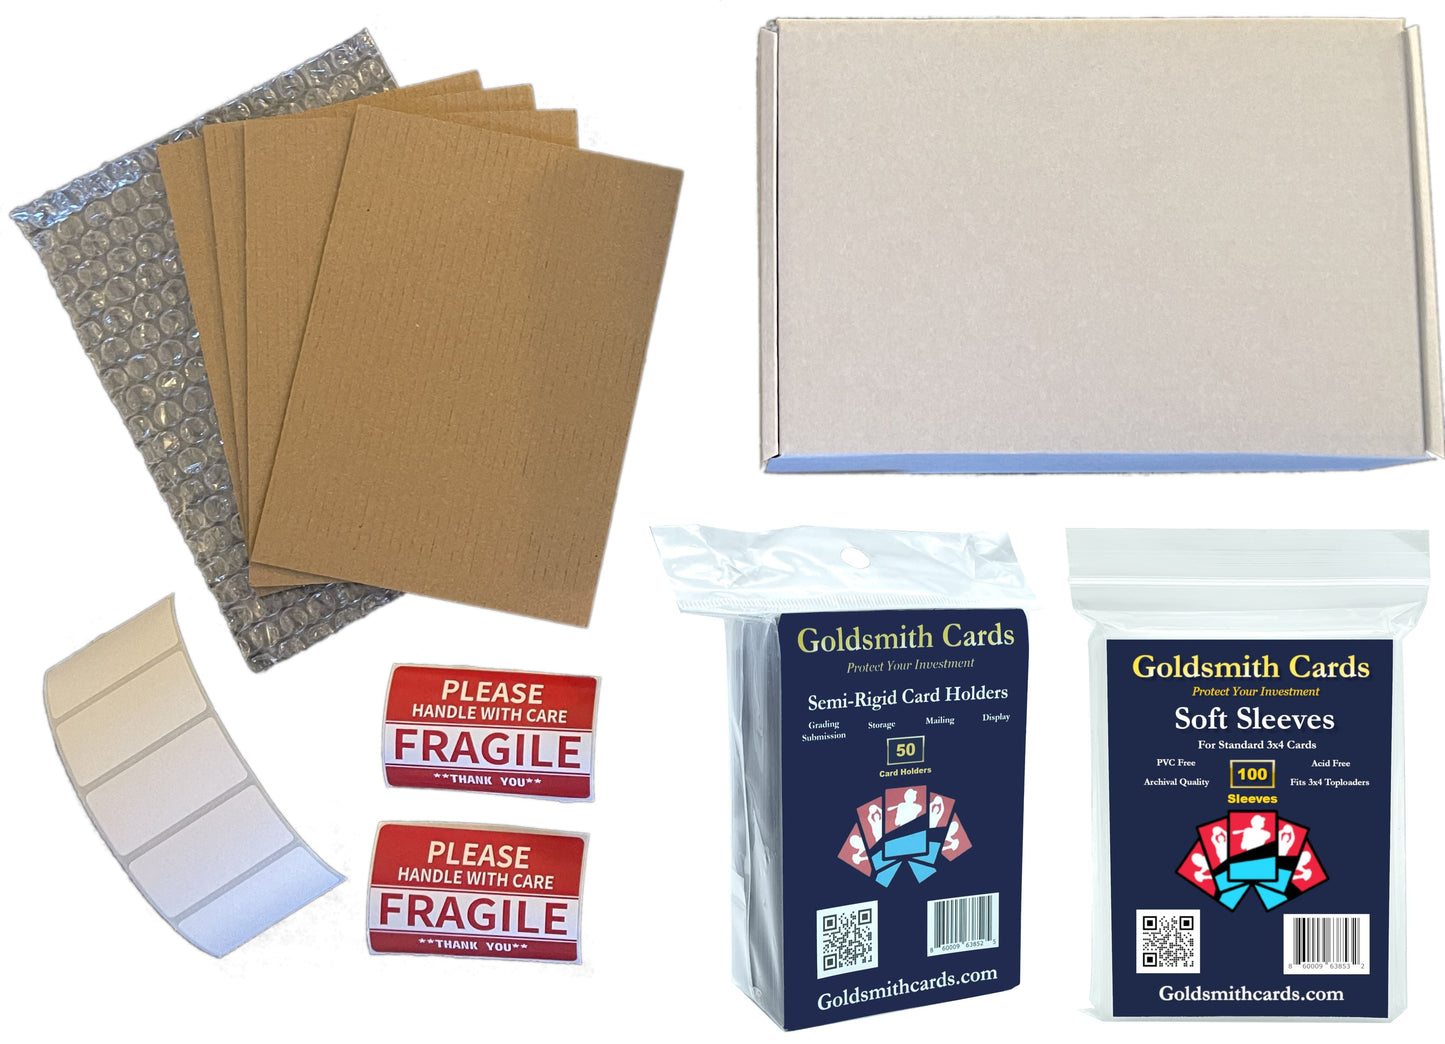 Cardboard+Gold+Semi+Rigid+Card+Holder+for+PSA%2FBGS+Graded+Card+Submittions+-+Pack+of+50  for sale online,  in 2023